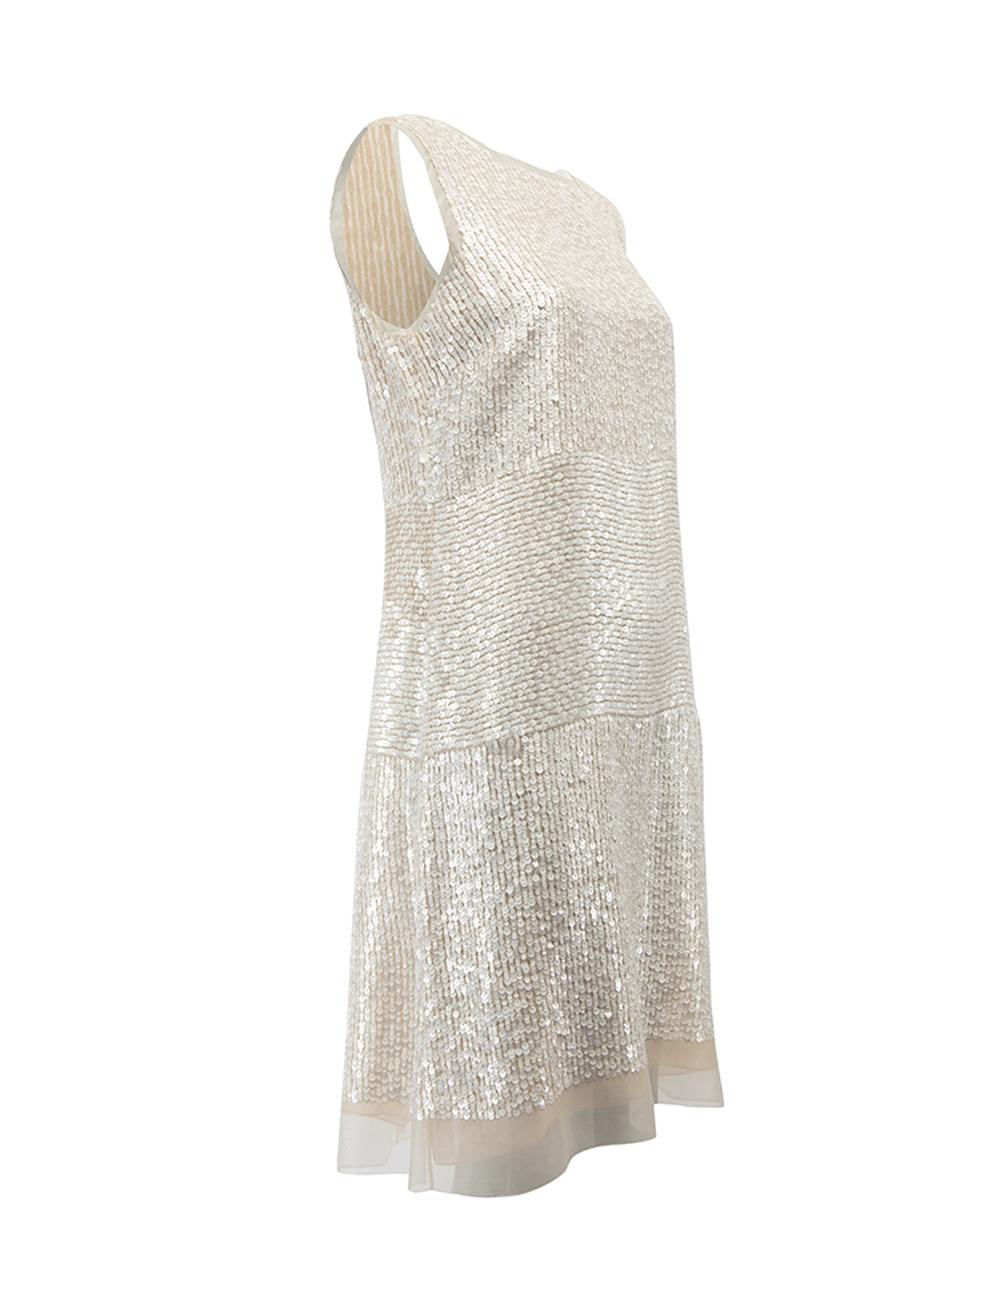 CONDITION is Very good. Minimal wear to dress is evident. Minimal missing sequins and a few loose threads on this used Vera Wang designer resale item. Details Cream Sequin Knee length dress Round neckline Sleeveless Back zip closure with hook and